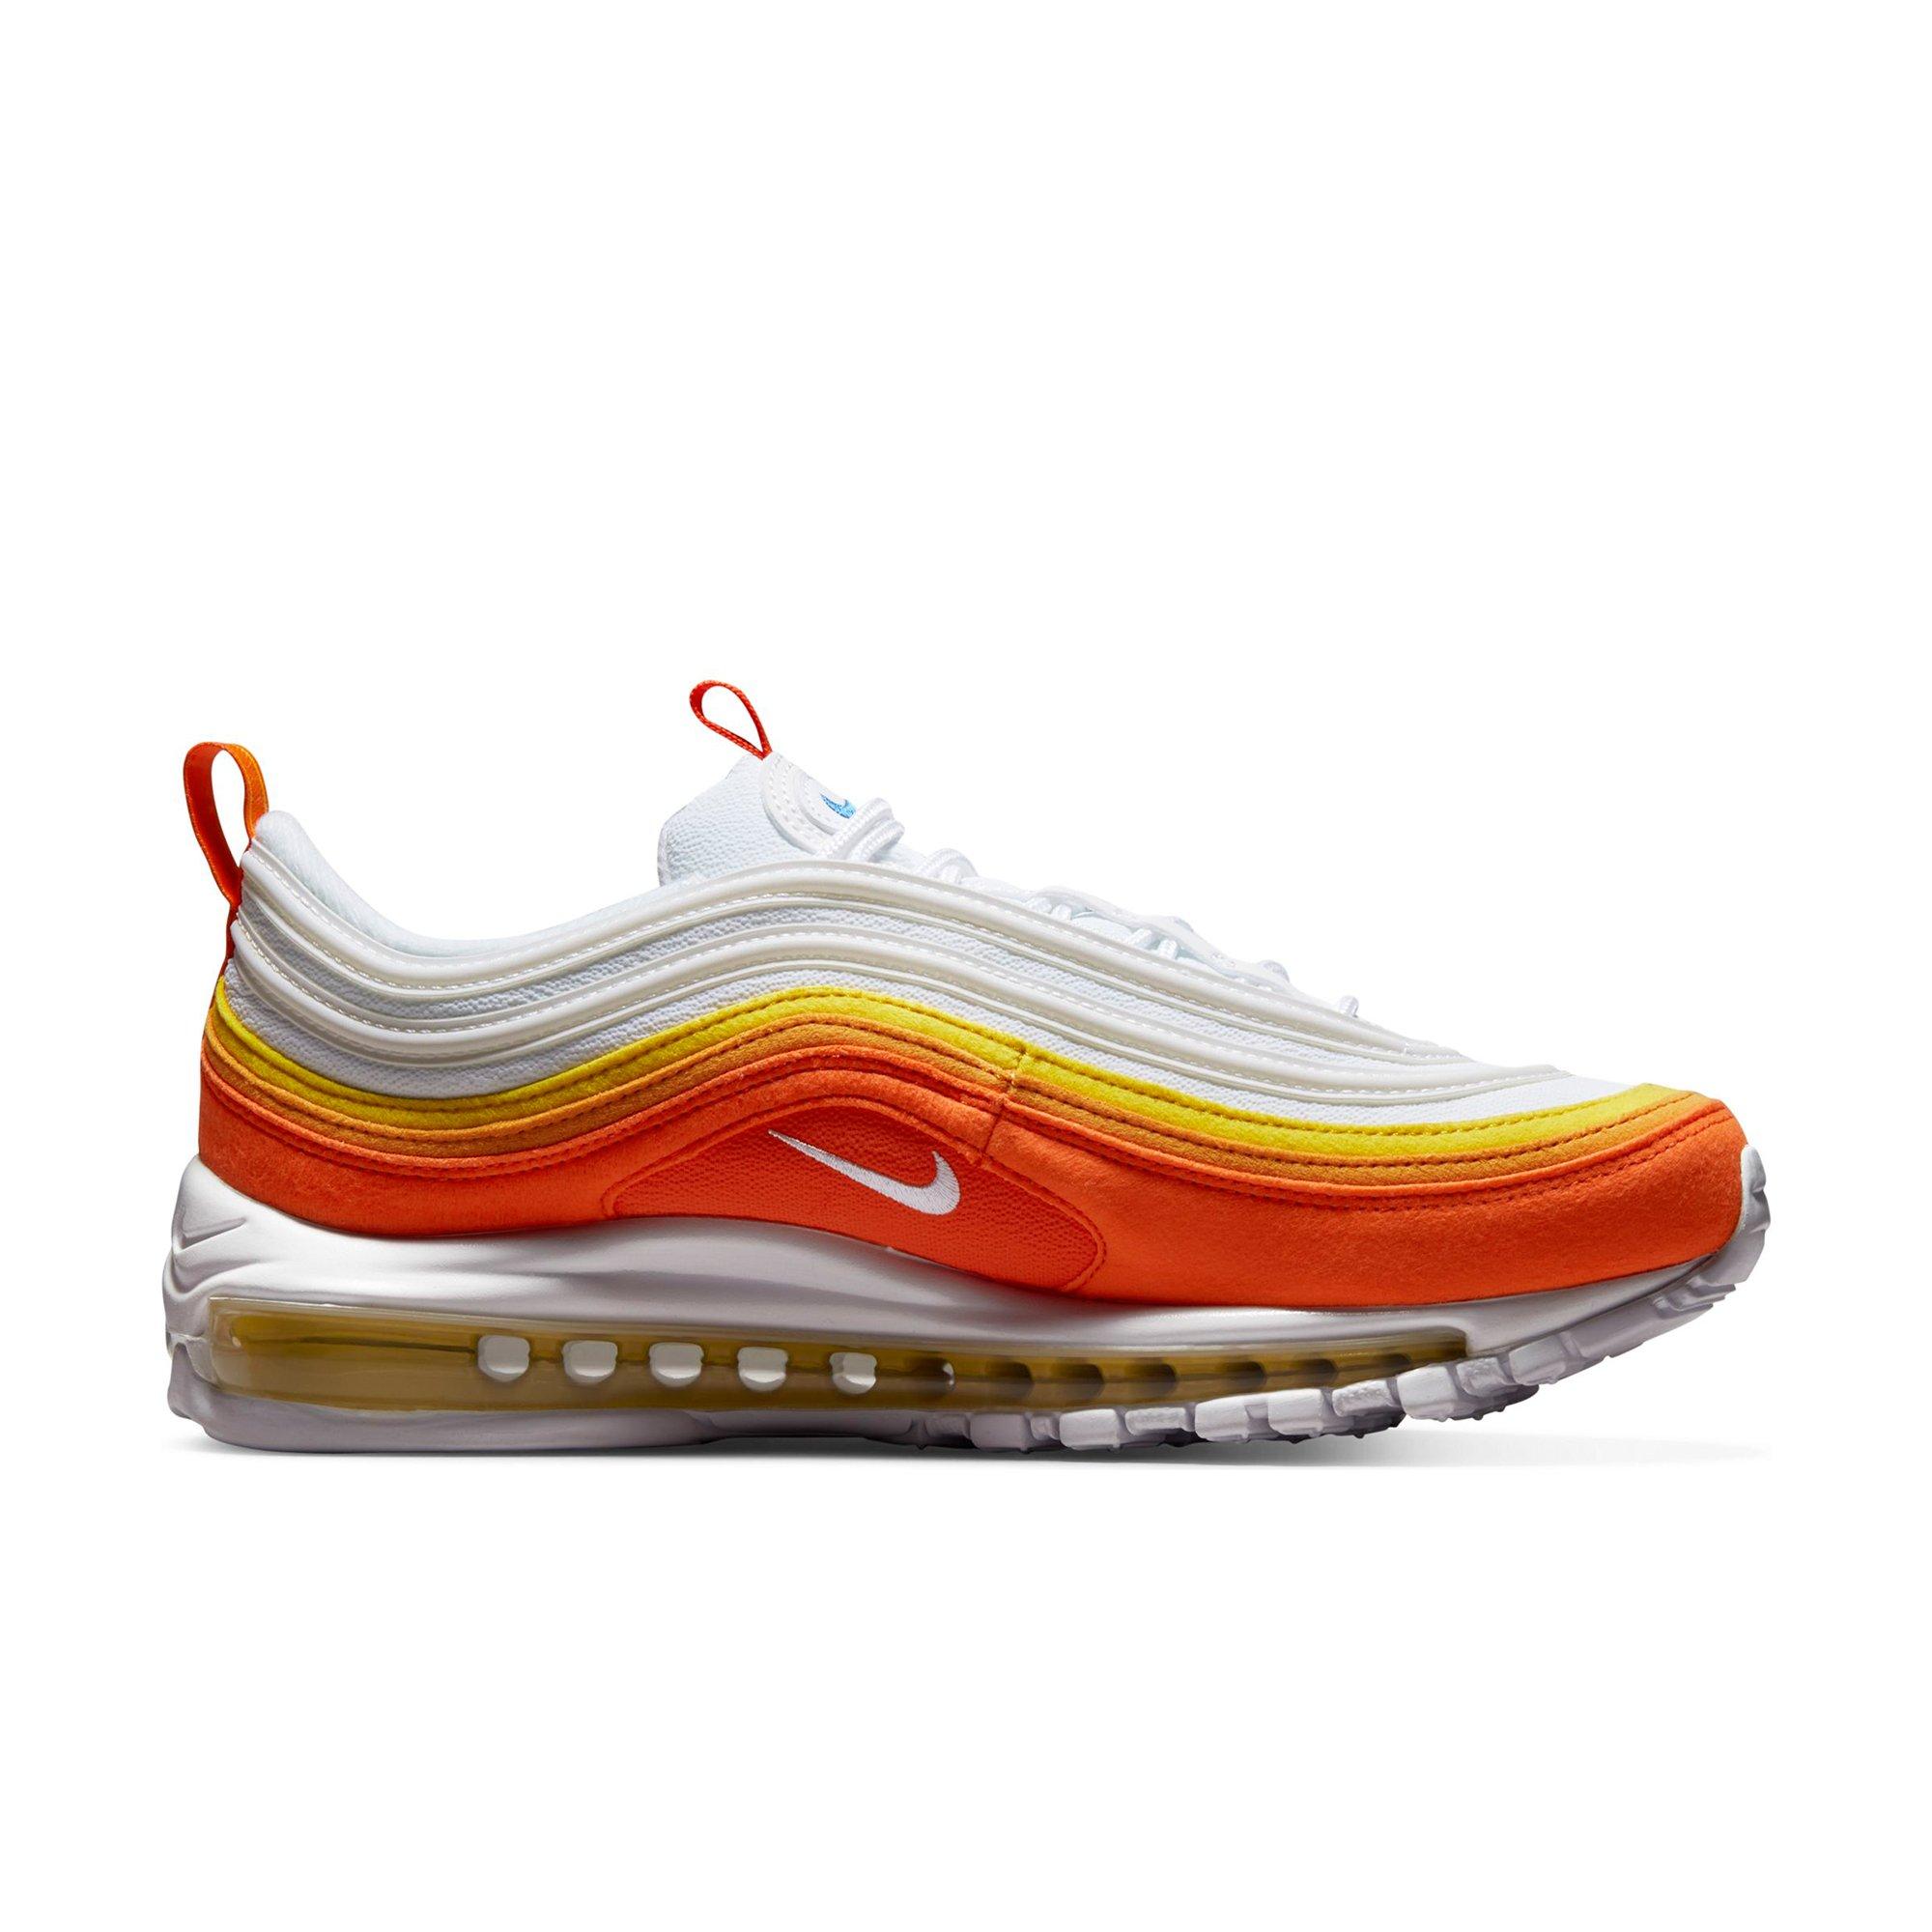 Jayson Tatum's new Air Max 97s pay homage to his hometown of St